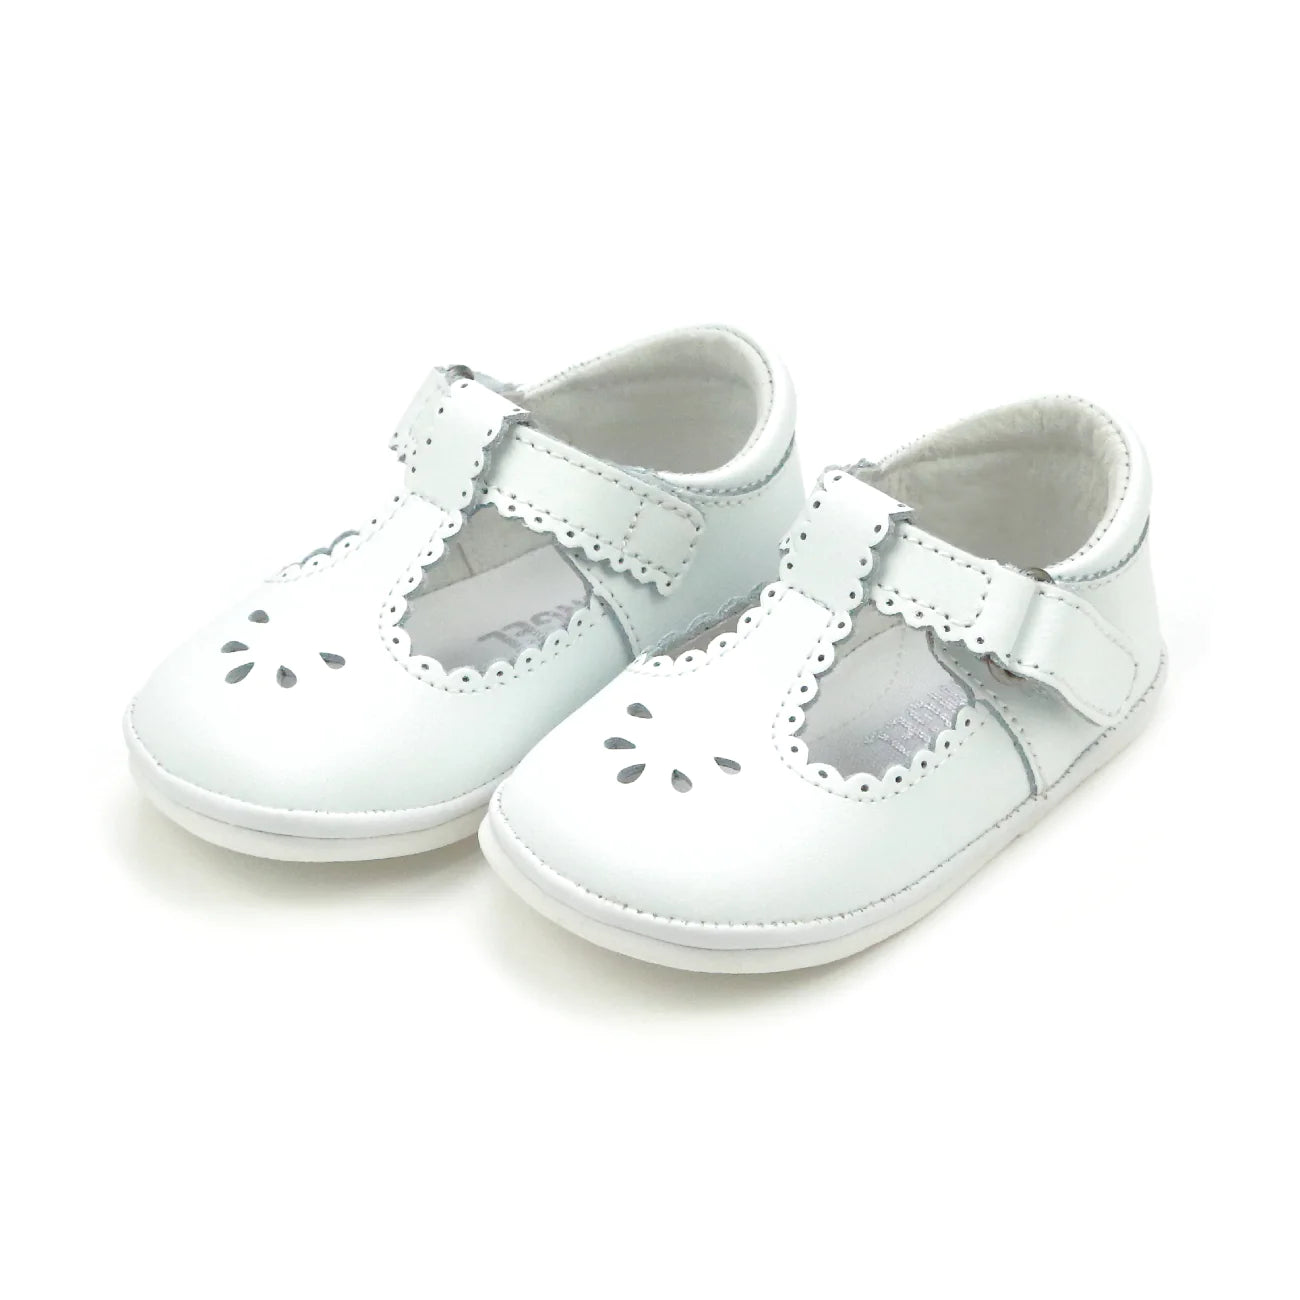 L'AMOUR Dottie Scalloped T-Strap Mary Jane (Baby) - White